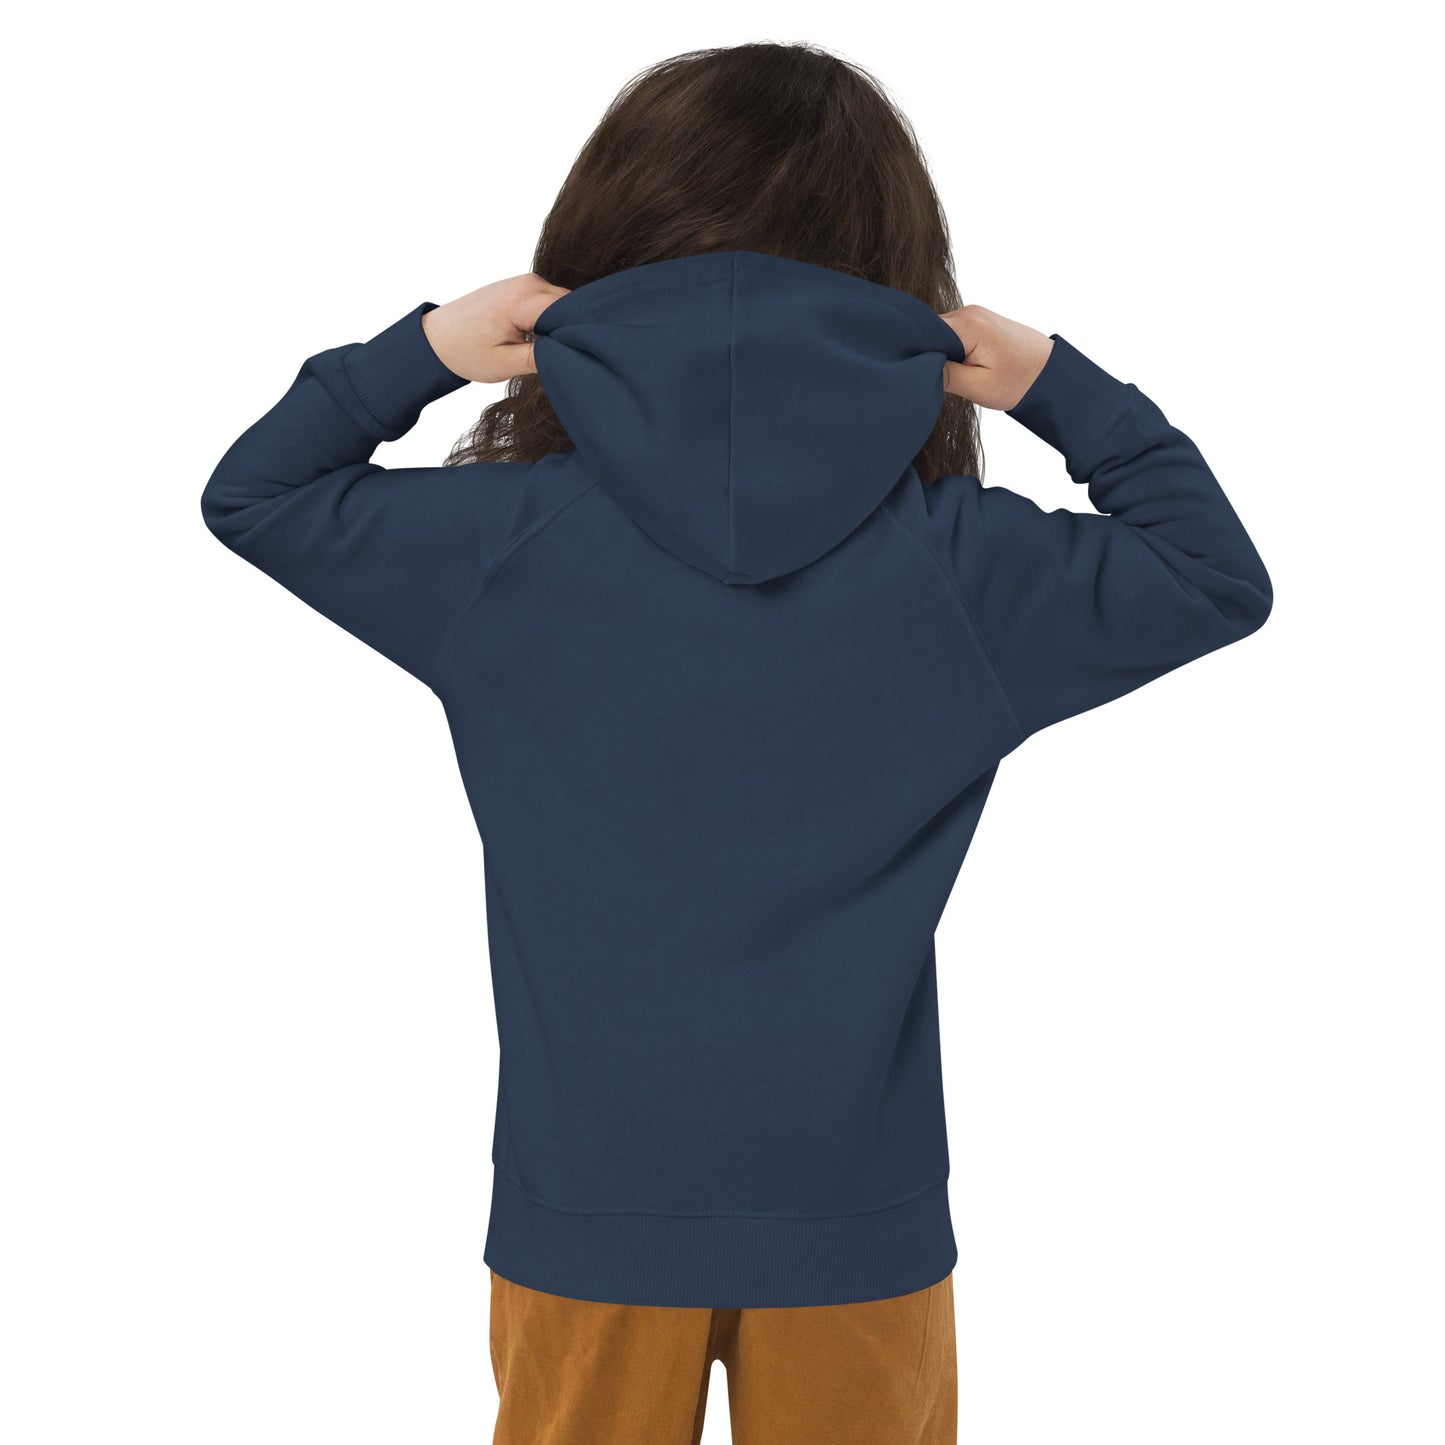 Kid's Sustainable Hoodie - Green Graphic • OGG Maui • YHM Designs - Image 08